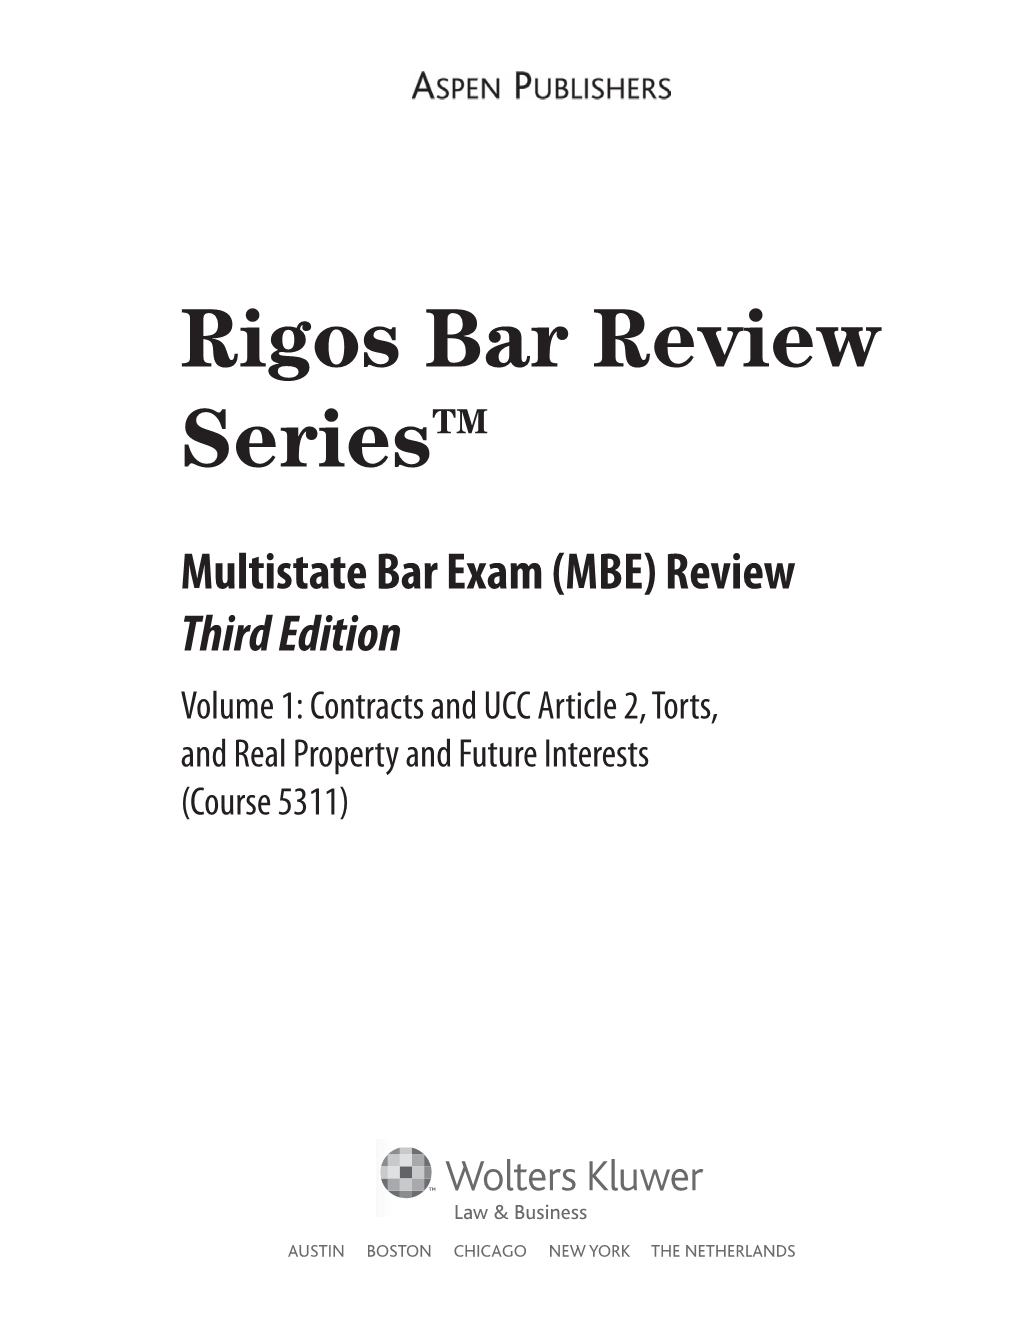 Rigos Multistate Bar Exam (MBE) Review, Third Edition Volume 1